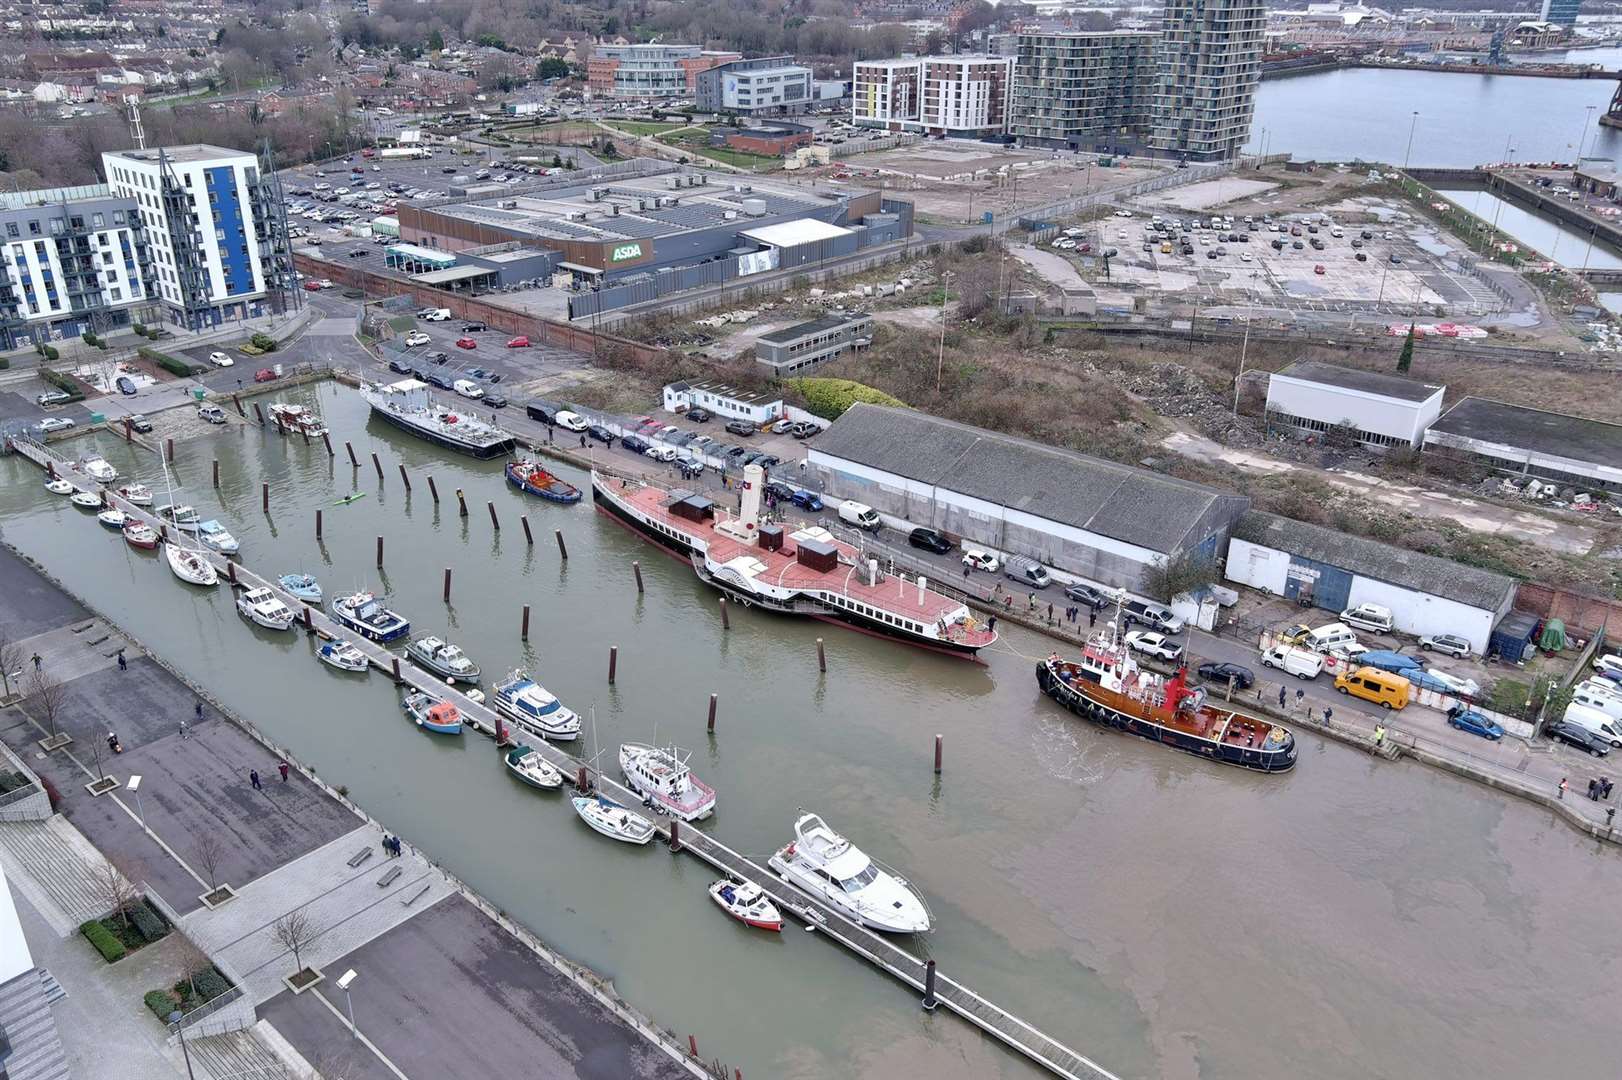 The Medway Queen is home Picture: Geoff Watkins - Aerial Imaging South East